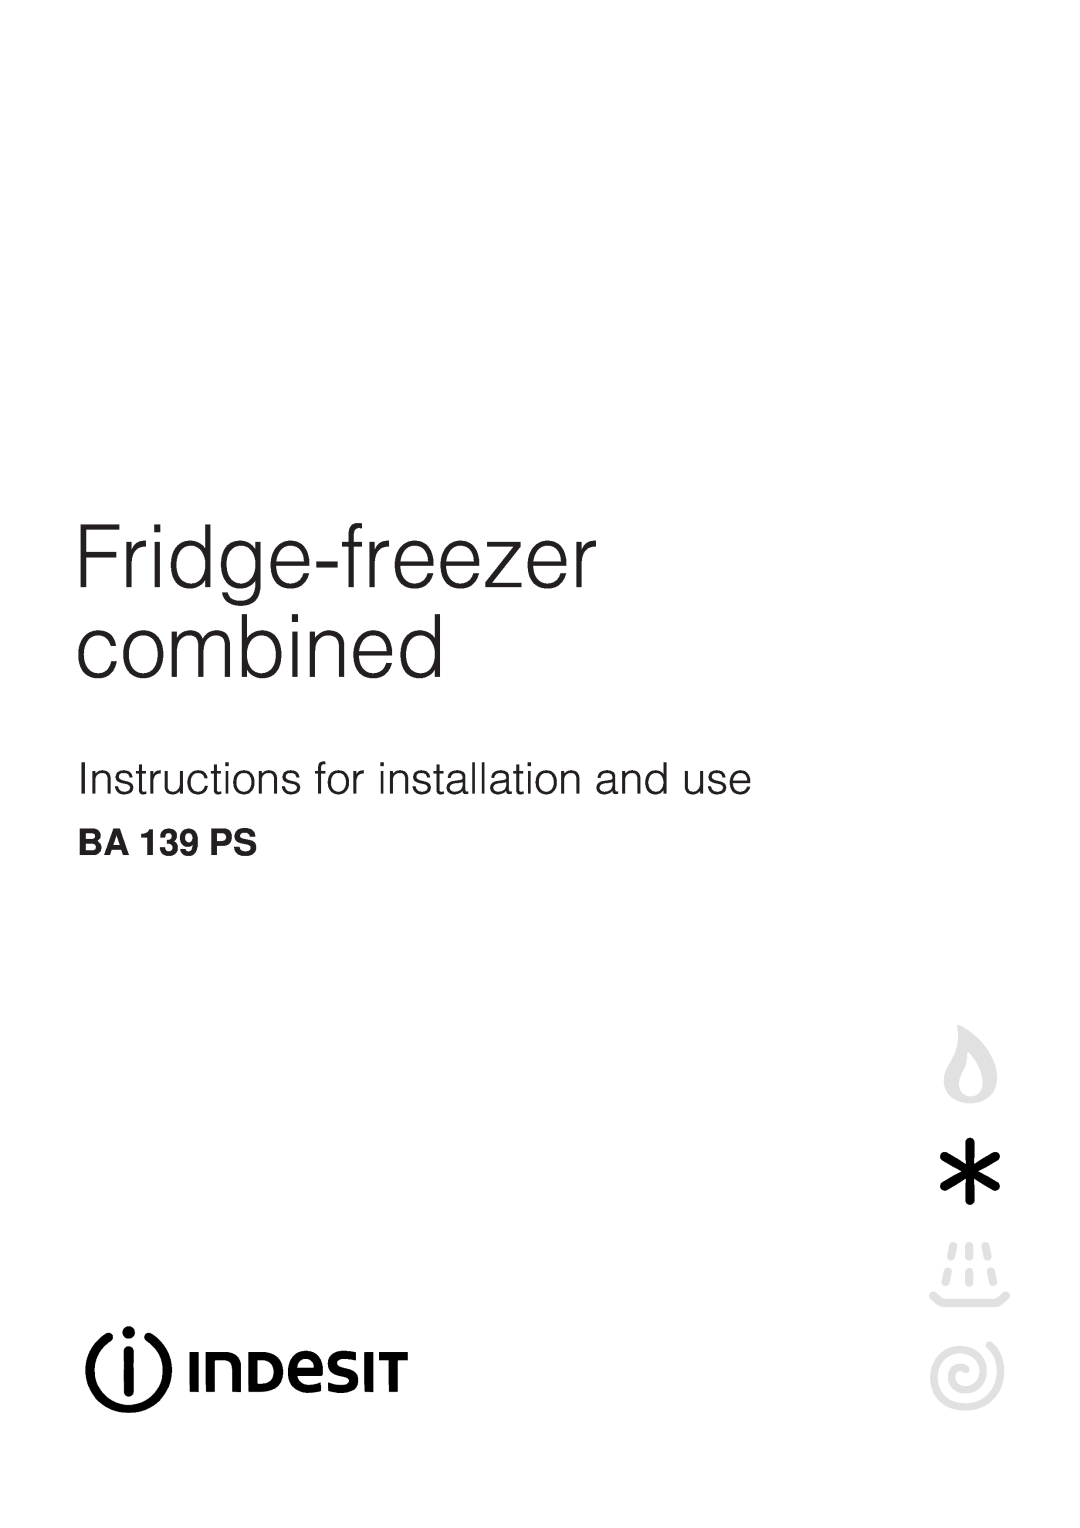 Indesit BA 139 PS manual Fridge-freezer combined, Instructions for installation and use 